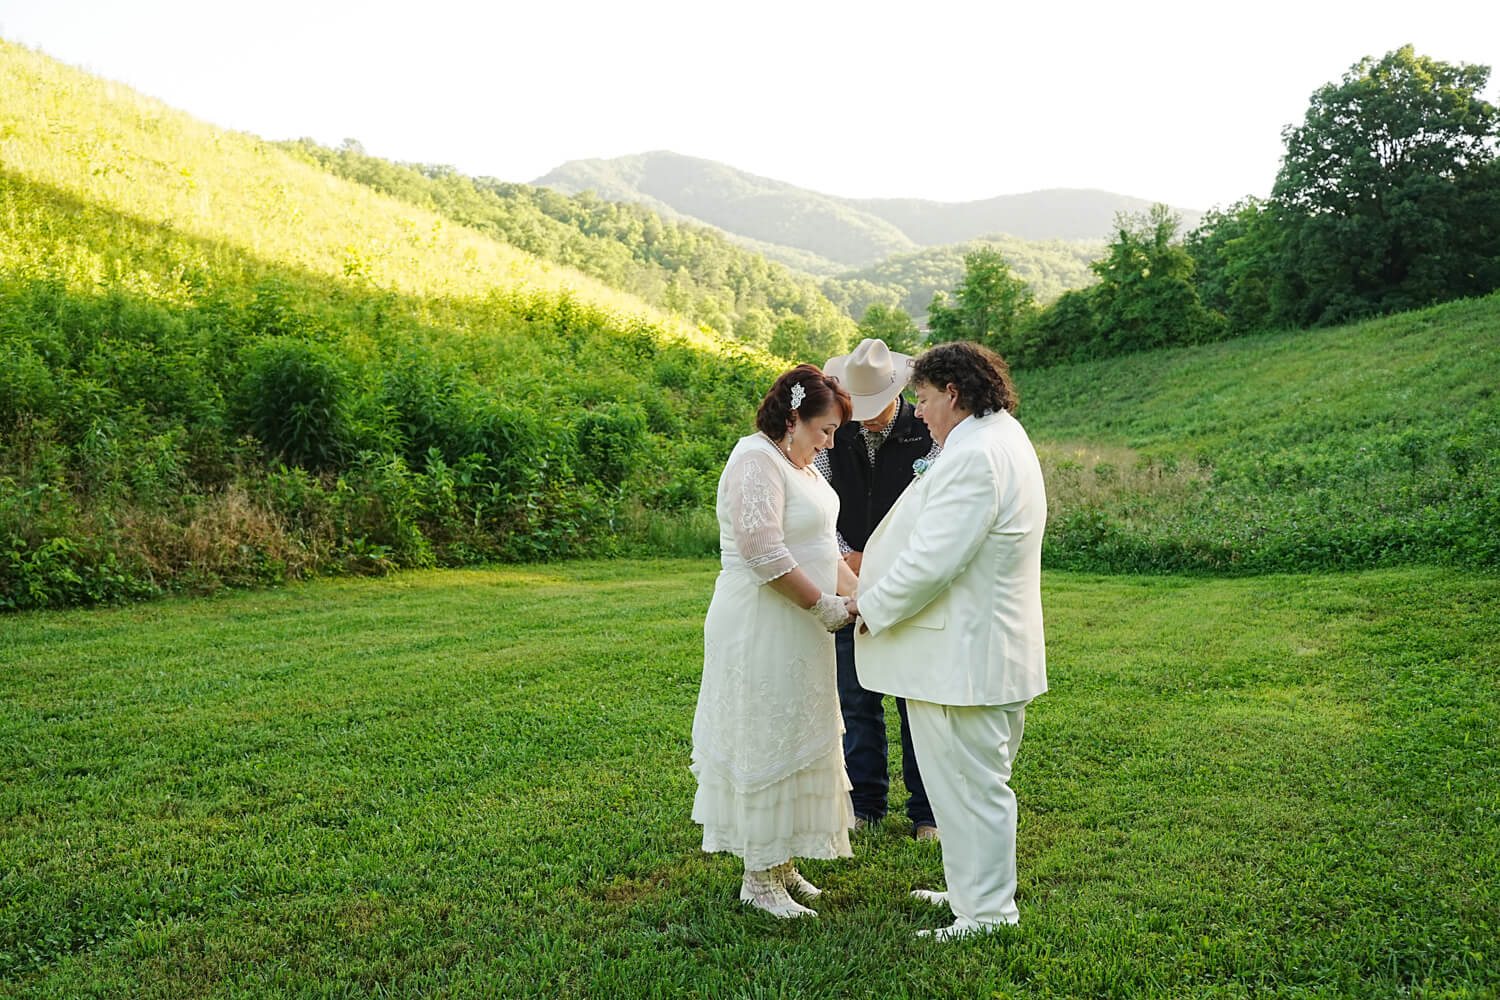 Couple getting married in a meadow with a mountain view